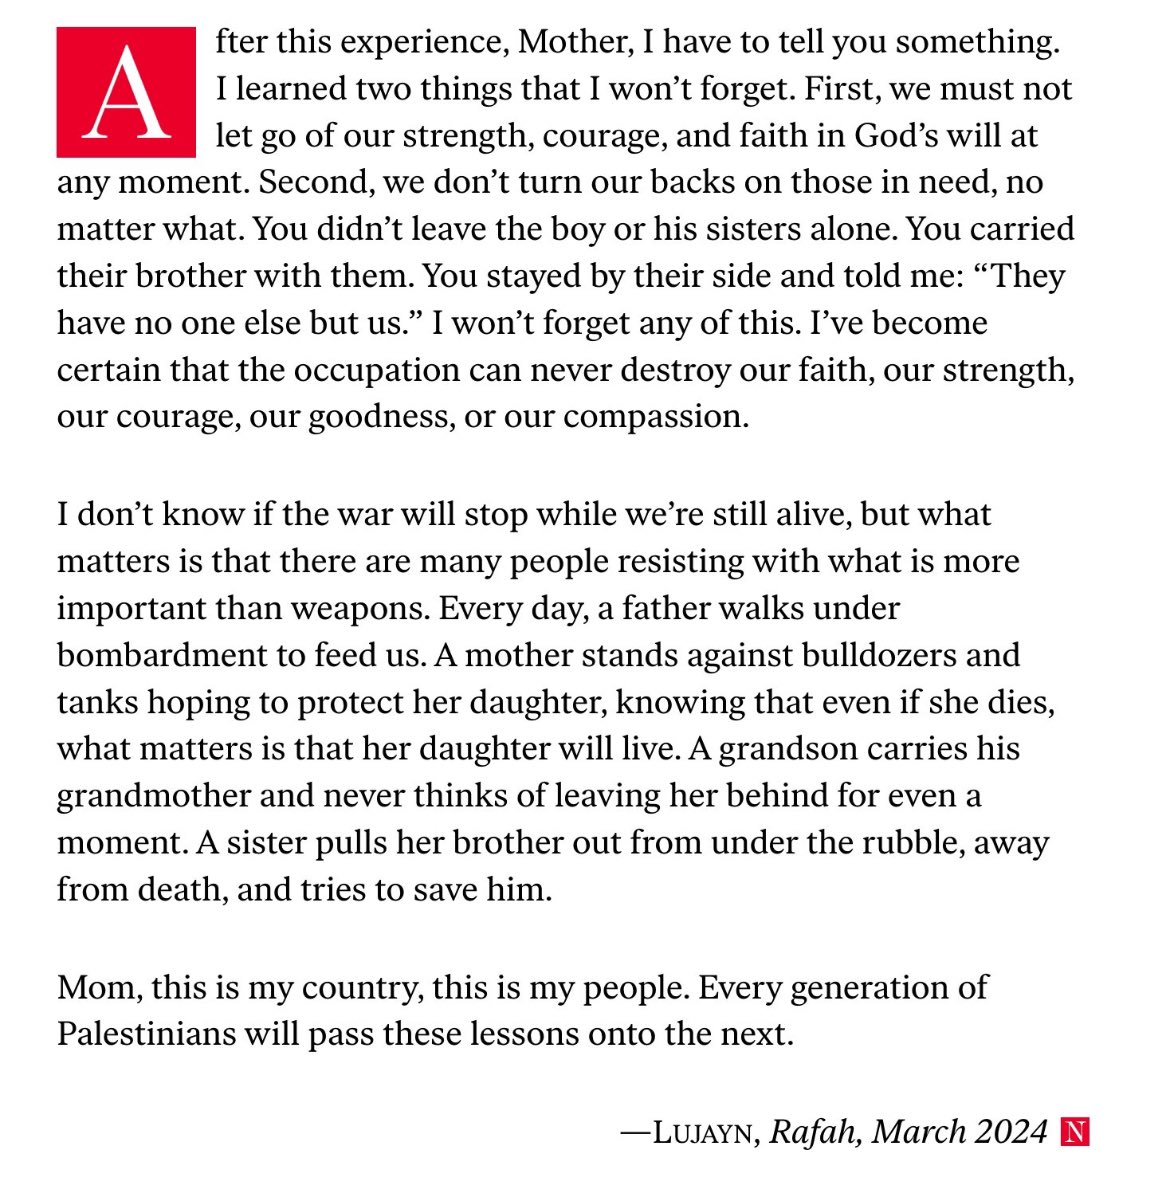 My god. Please read this today. My heart is broken open again. Thank you Lujayn for telling your story. “The occupation can never destroy our faith, our strength, our courage, our goodness, or our compassion.” thenation.com/article/world/…